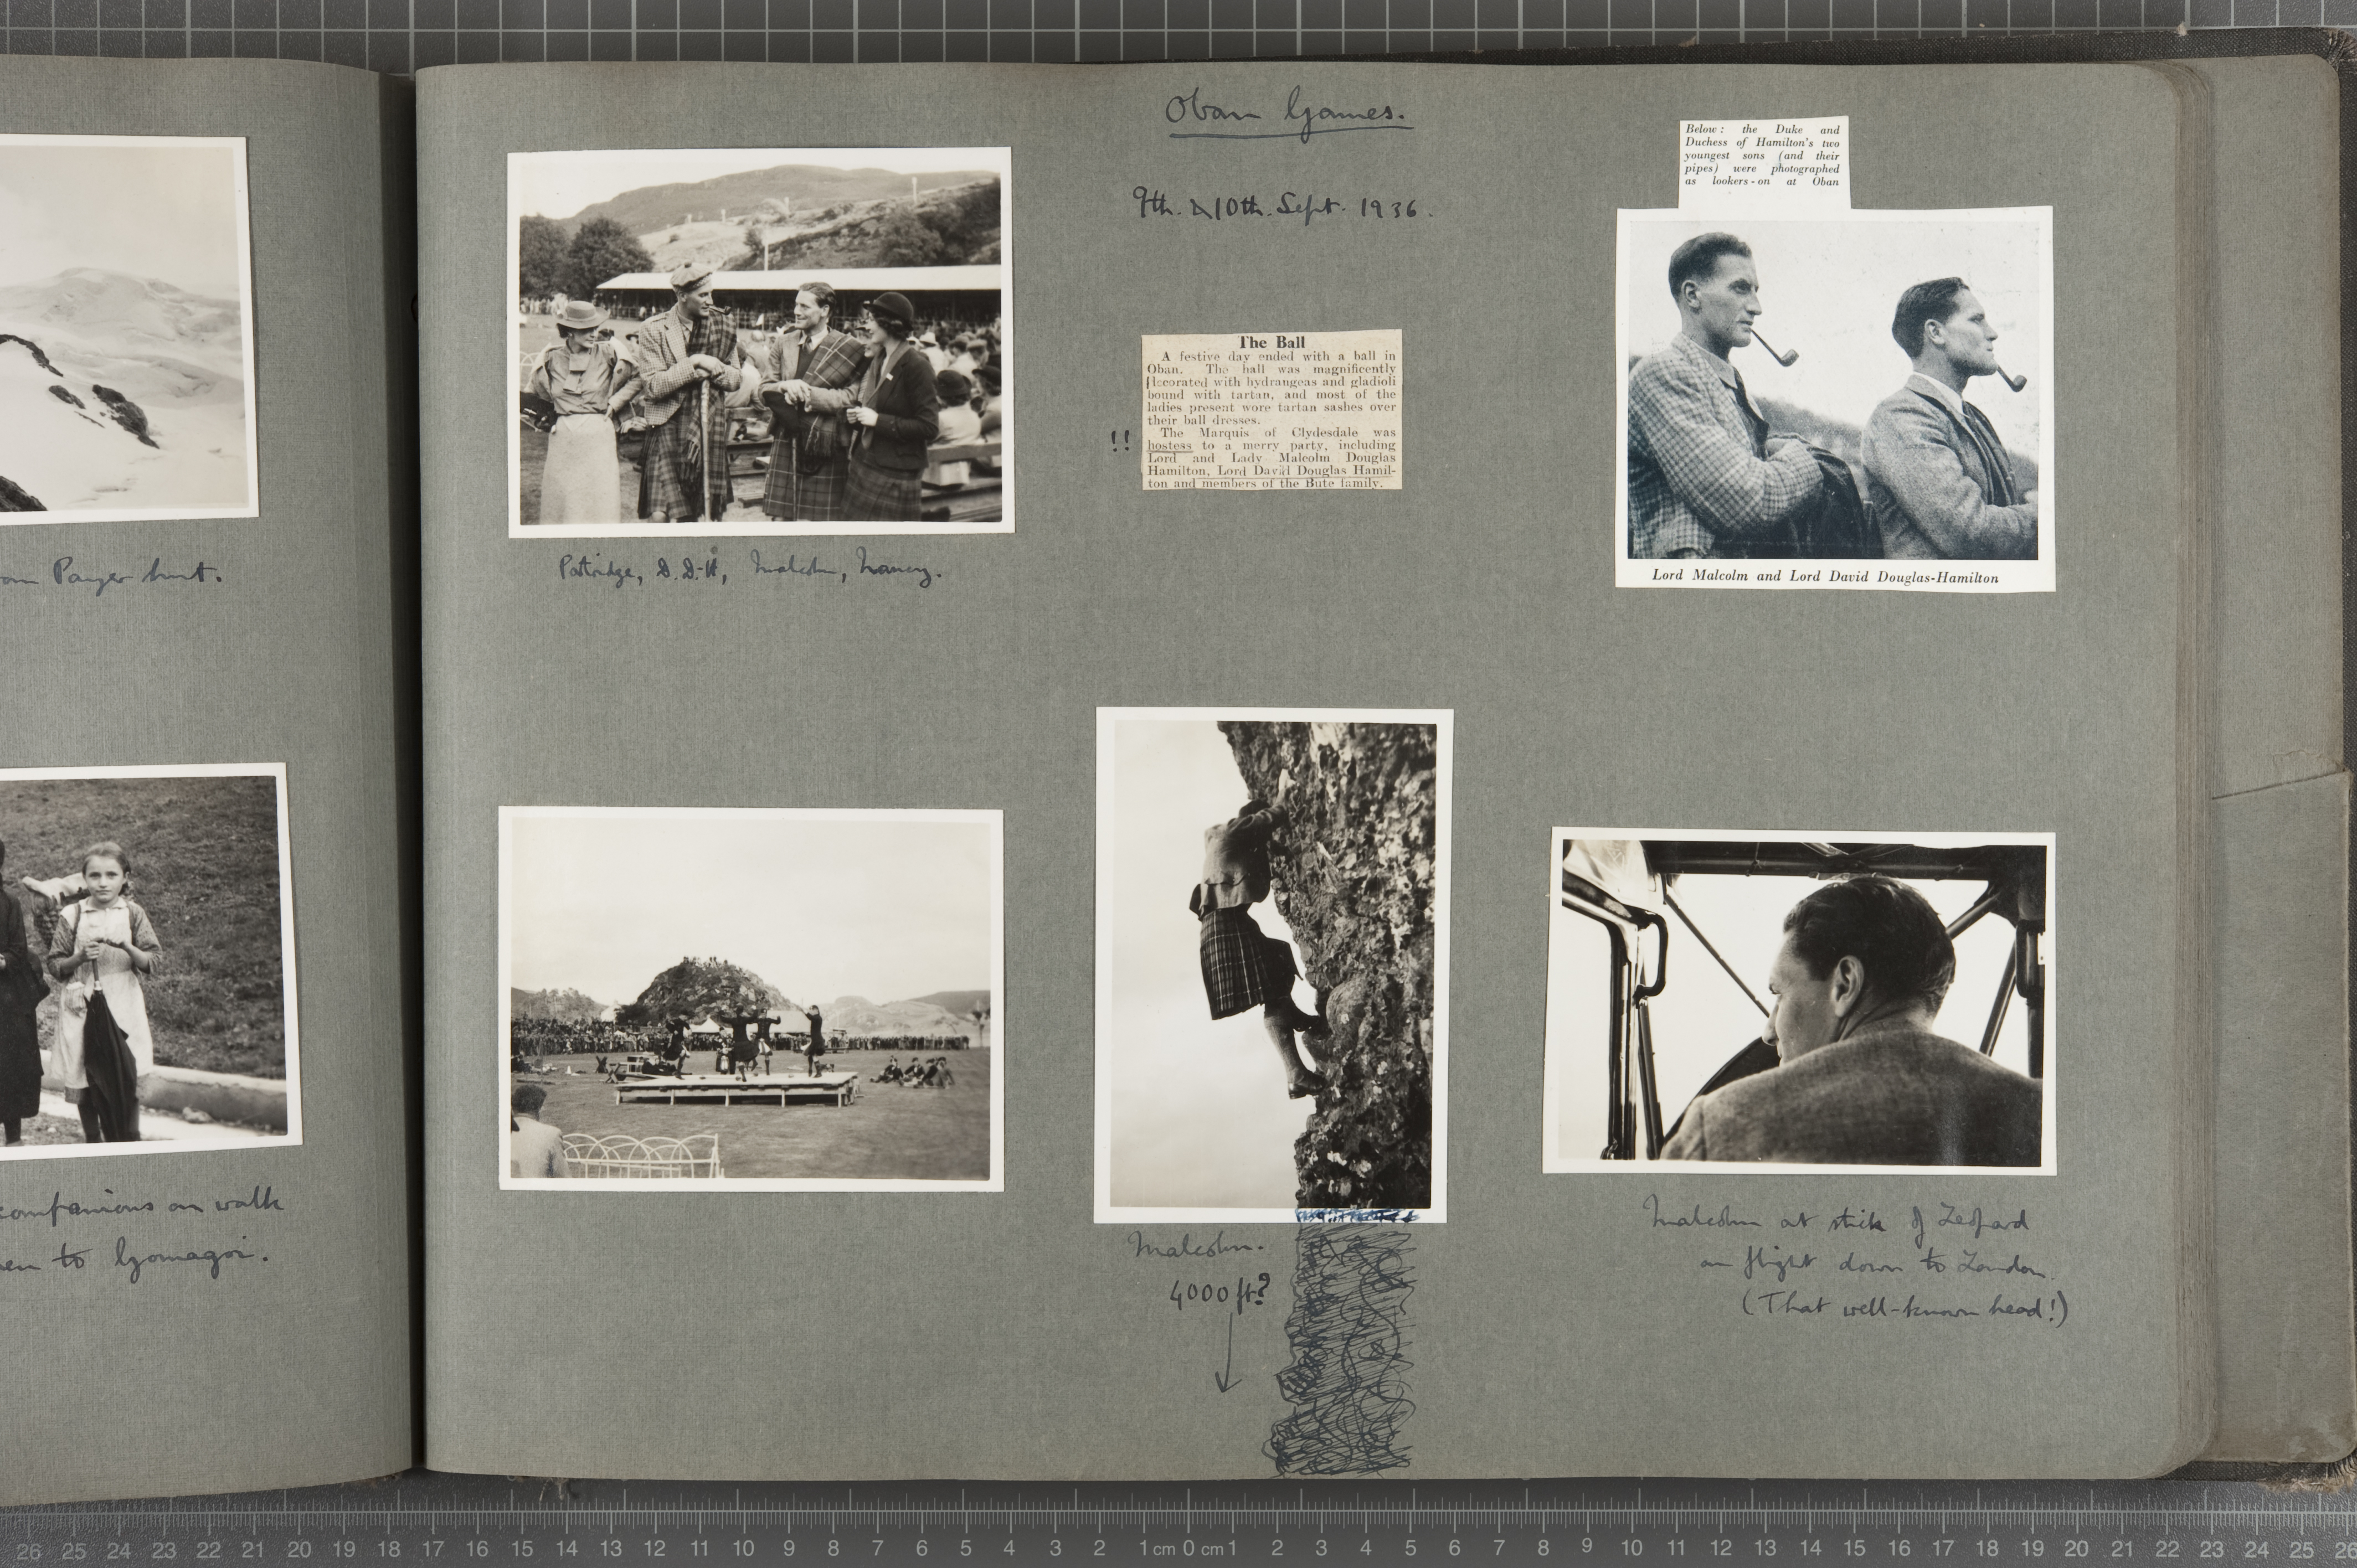 Page from the personal photographic album of Lord David Douglas-Hamilton, Oban Games 8th-10th of September 1936 (Digital surrogates generously donated by the family in 2010)